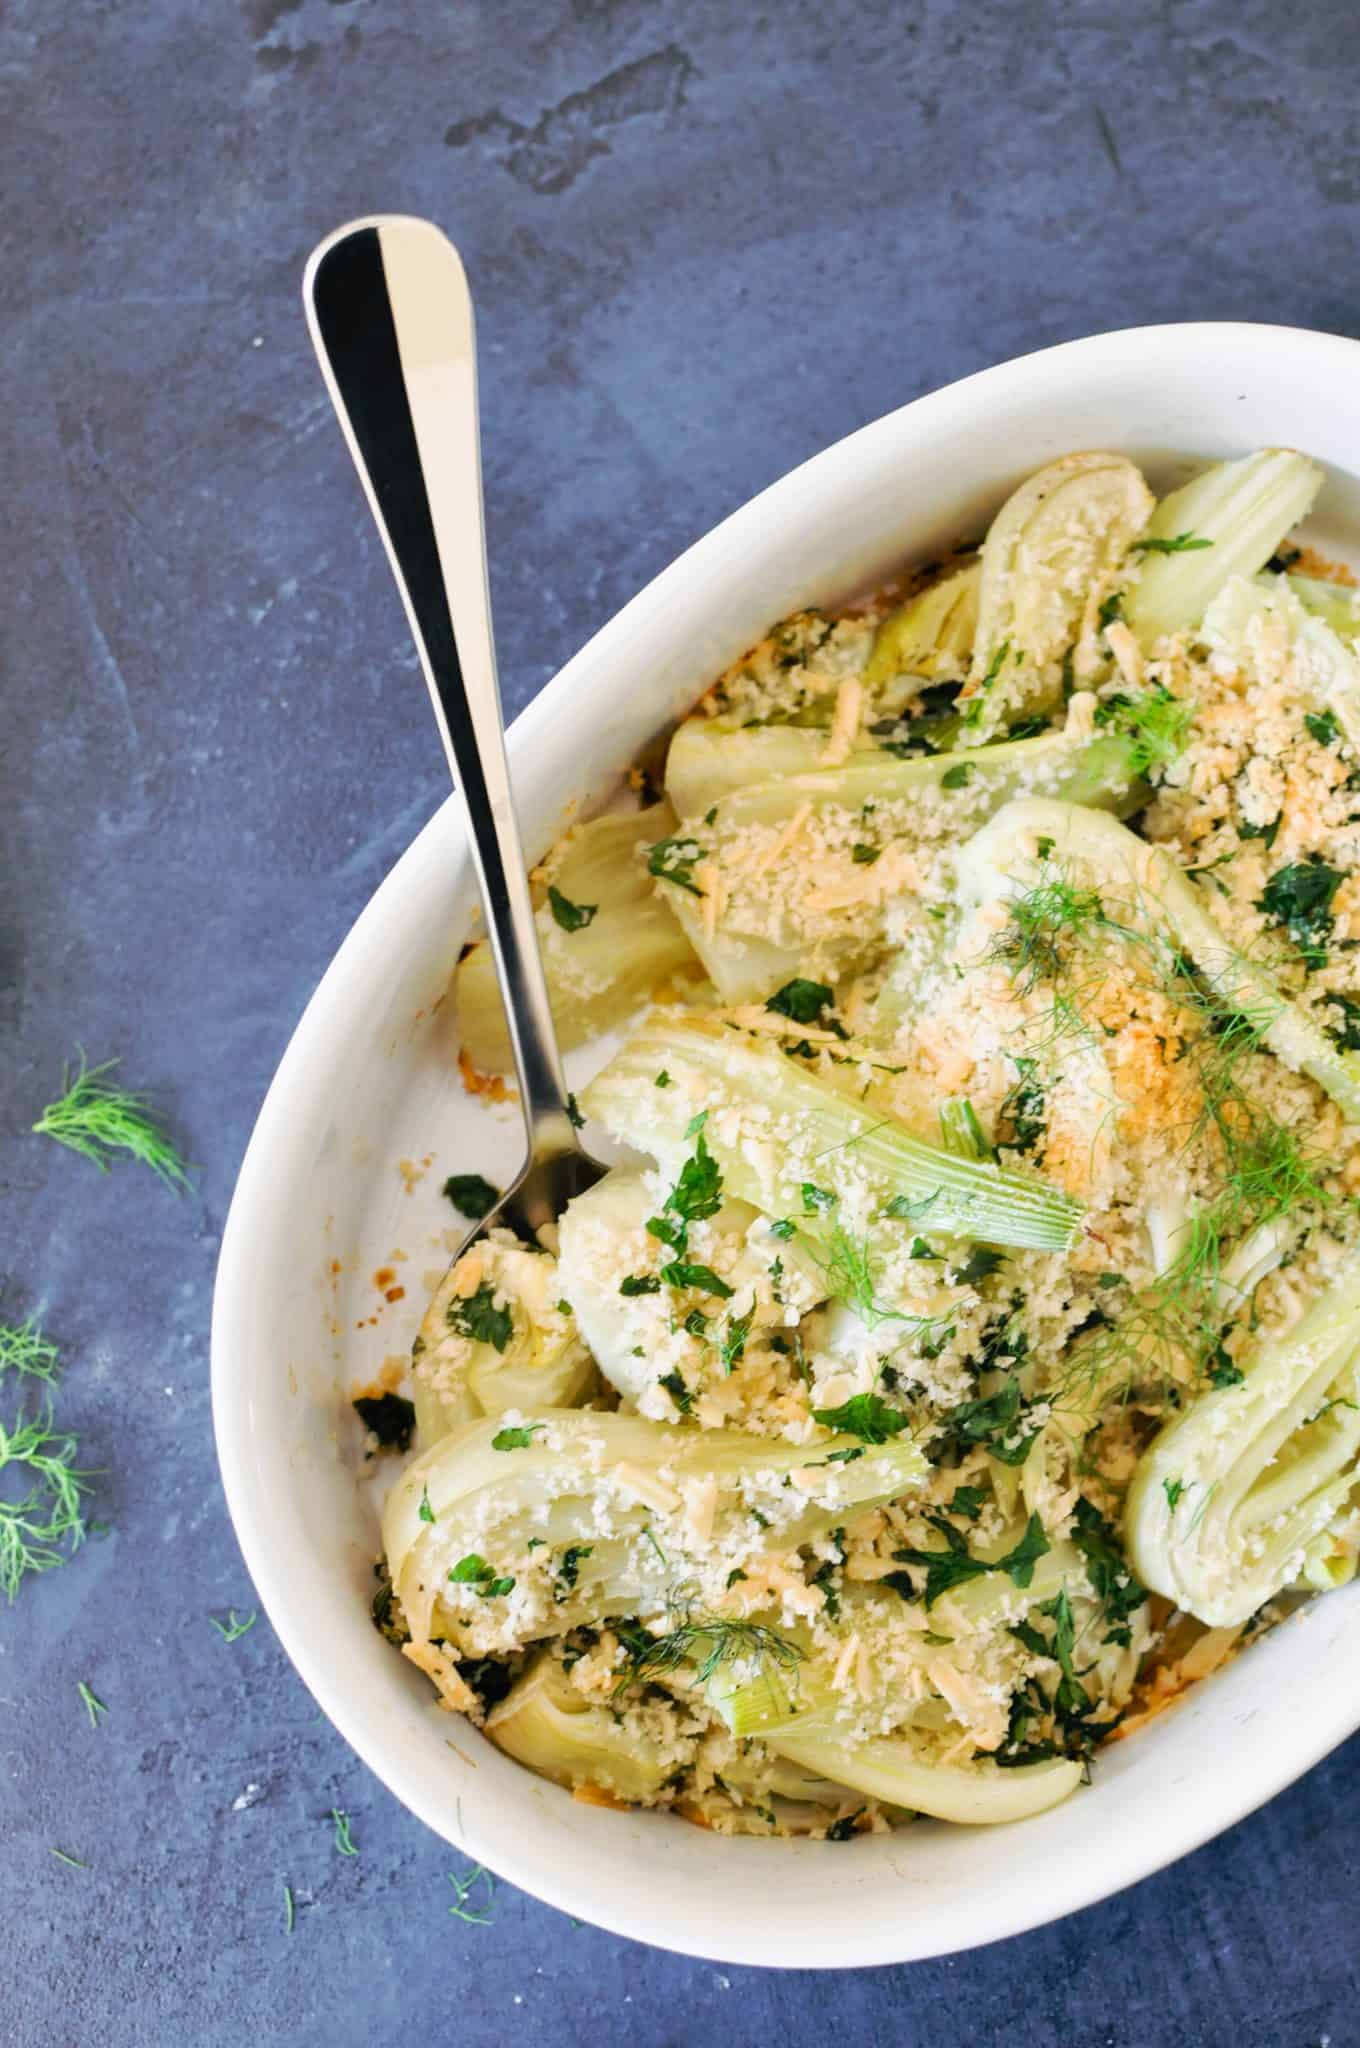 Fennel Gratin Recipe - This Healthy Table